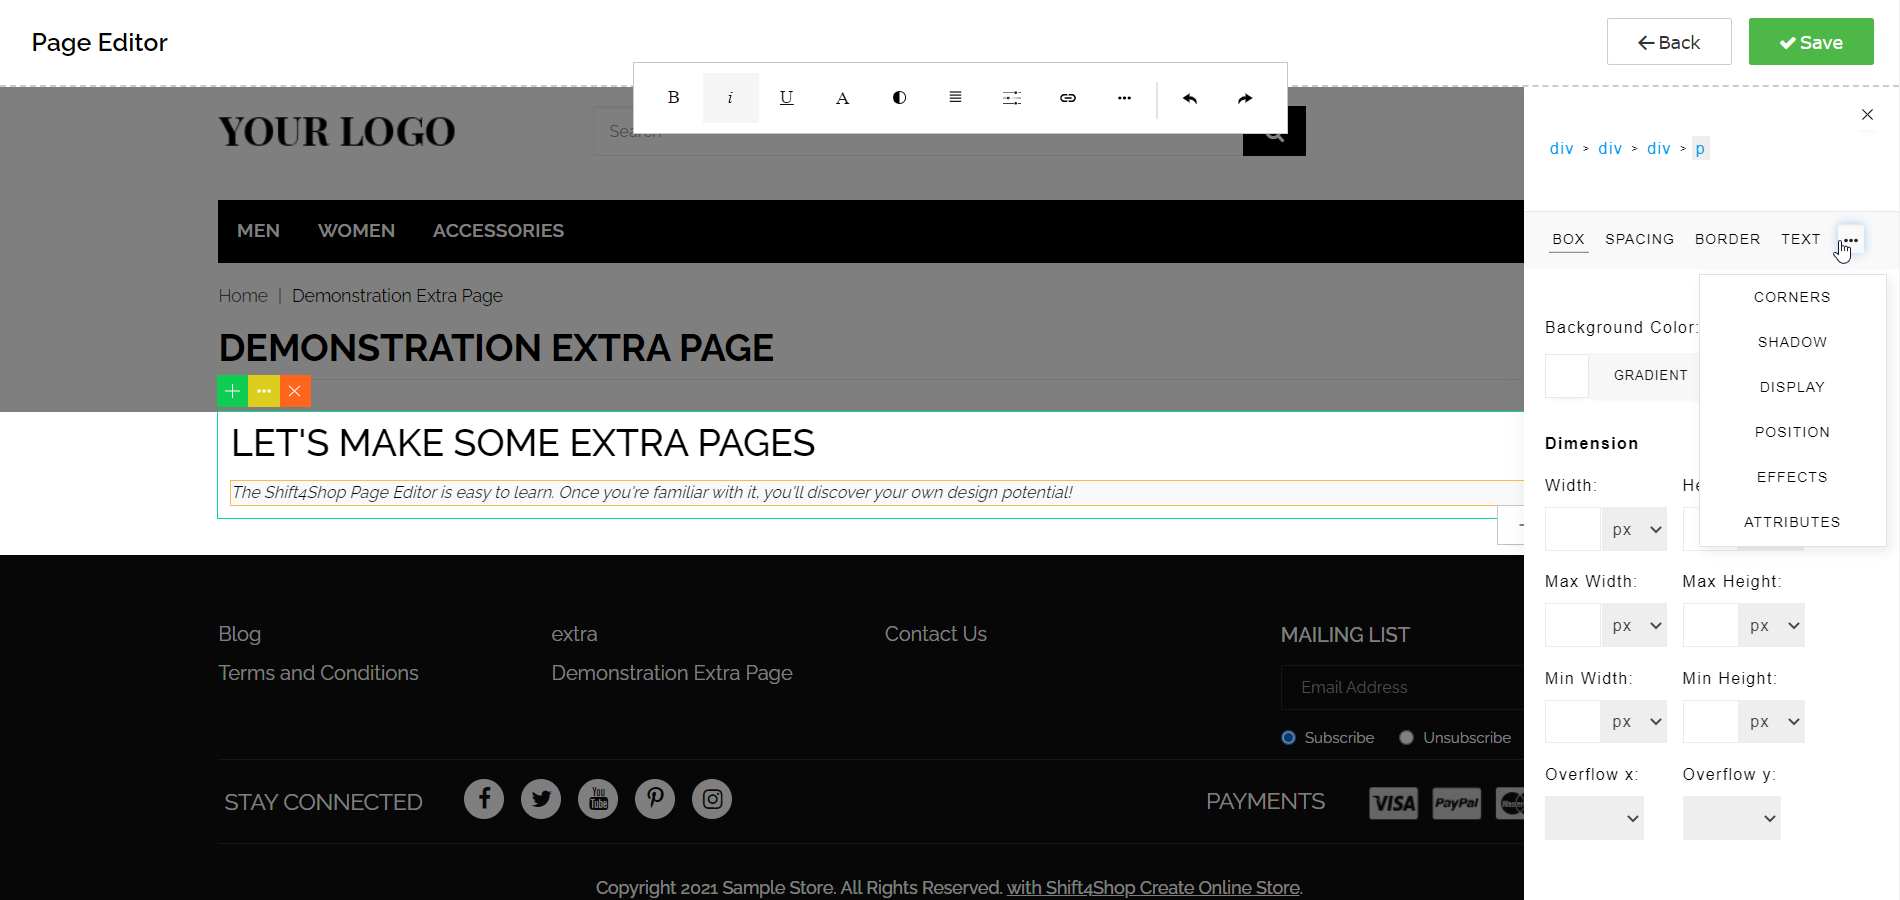 Using the Page Editor - Element Format Settings